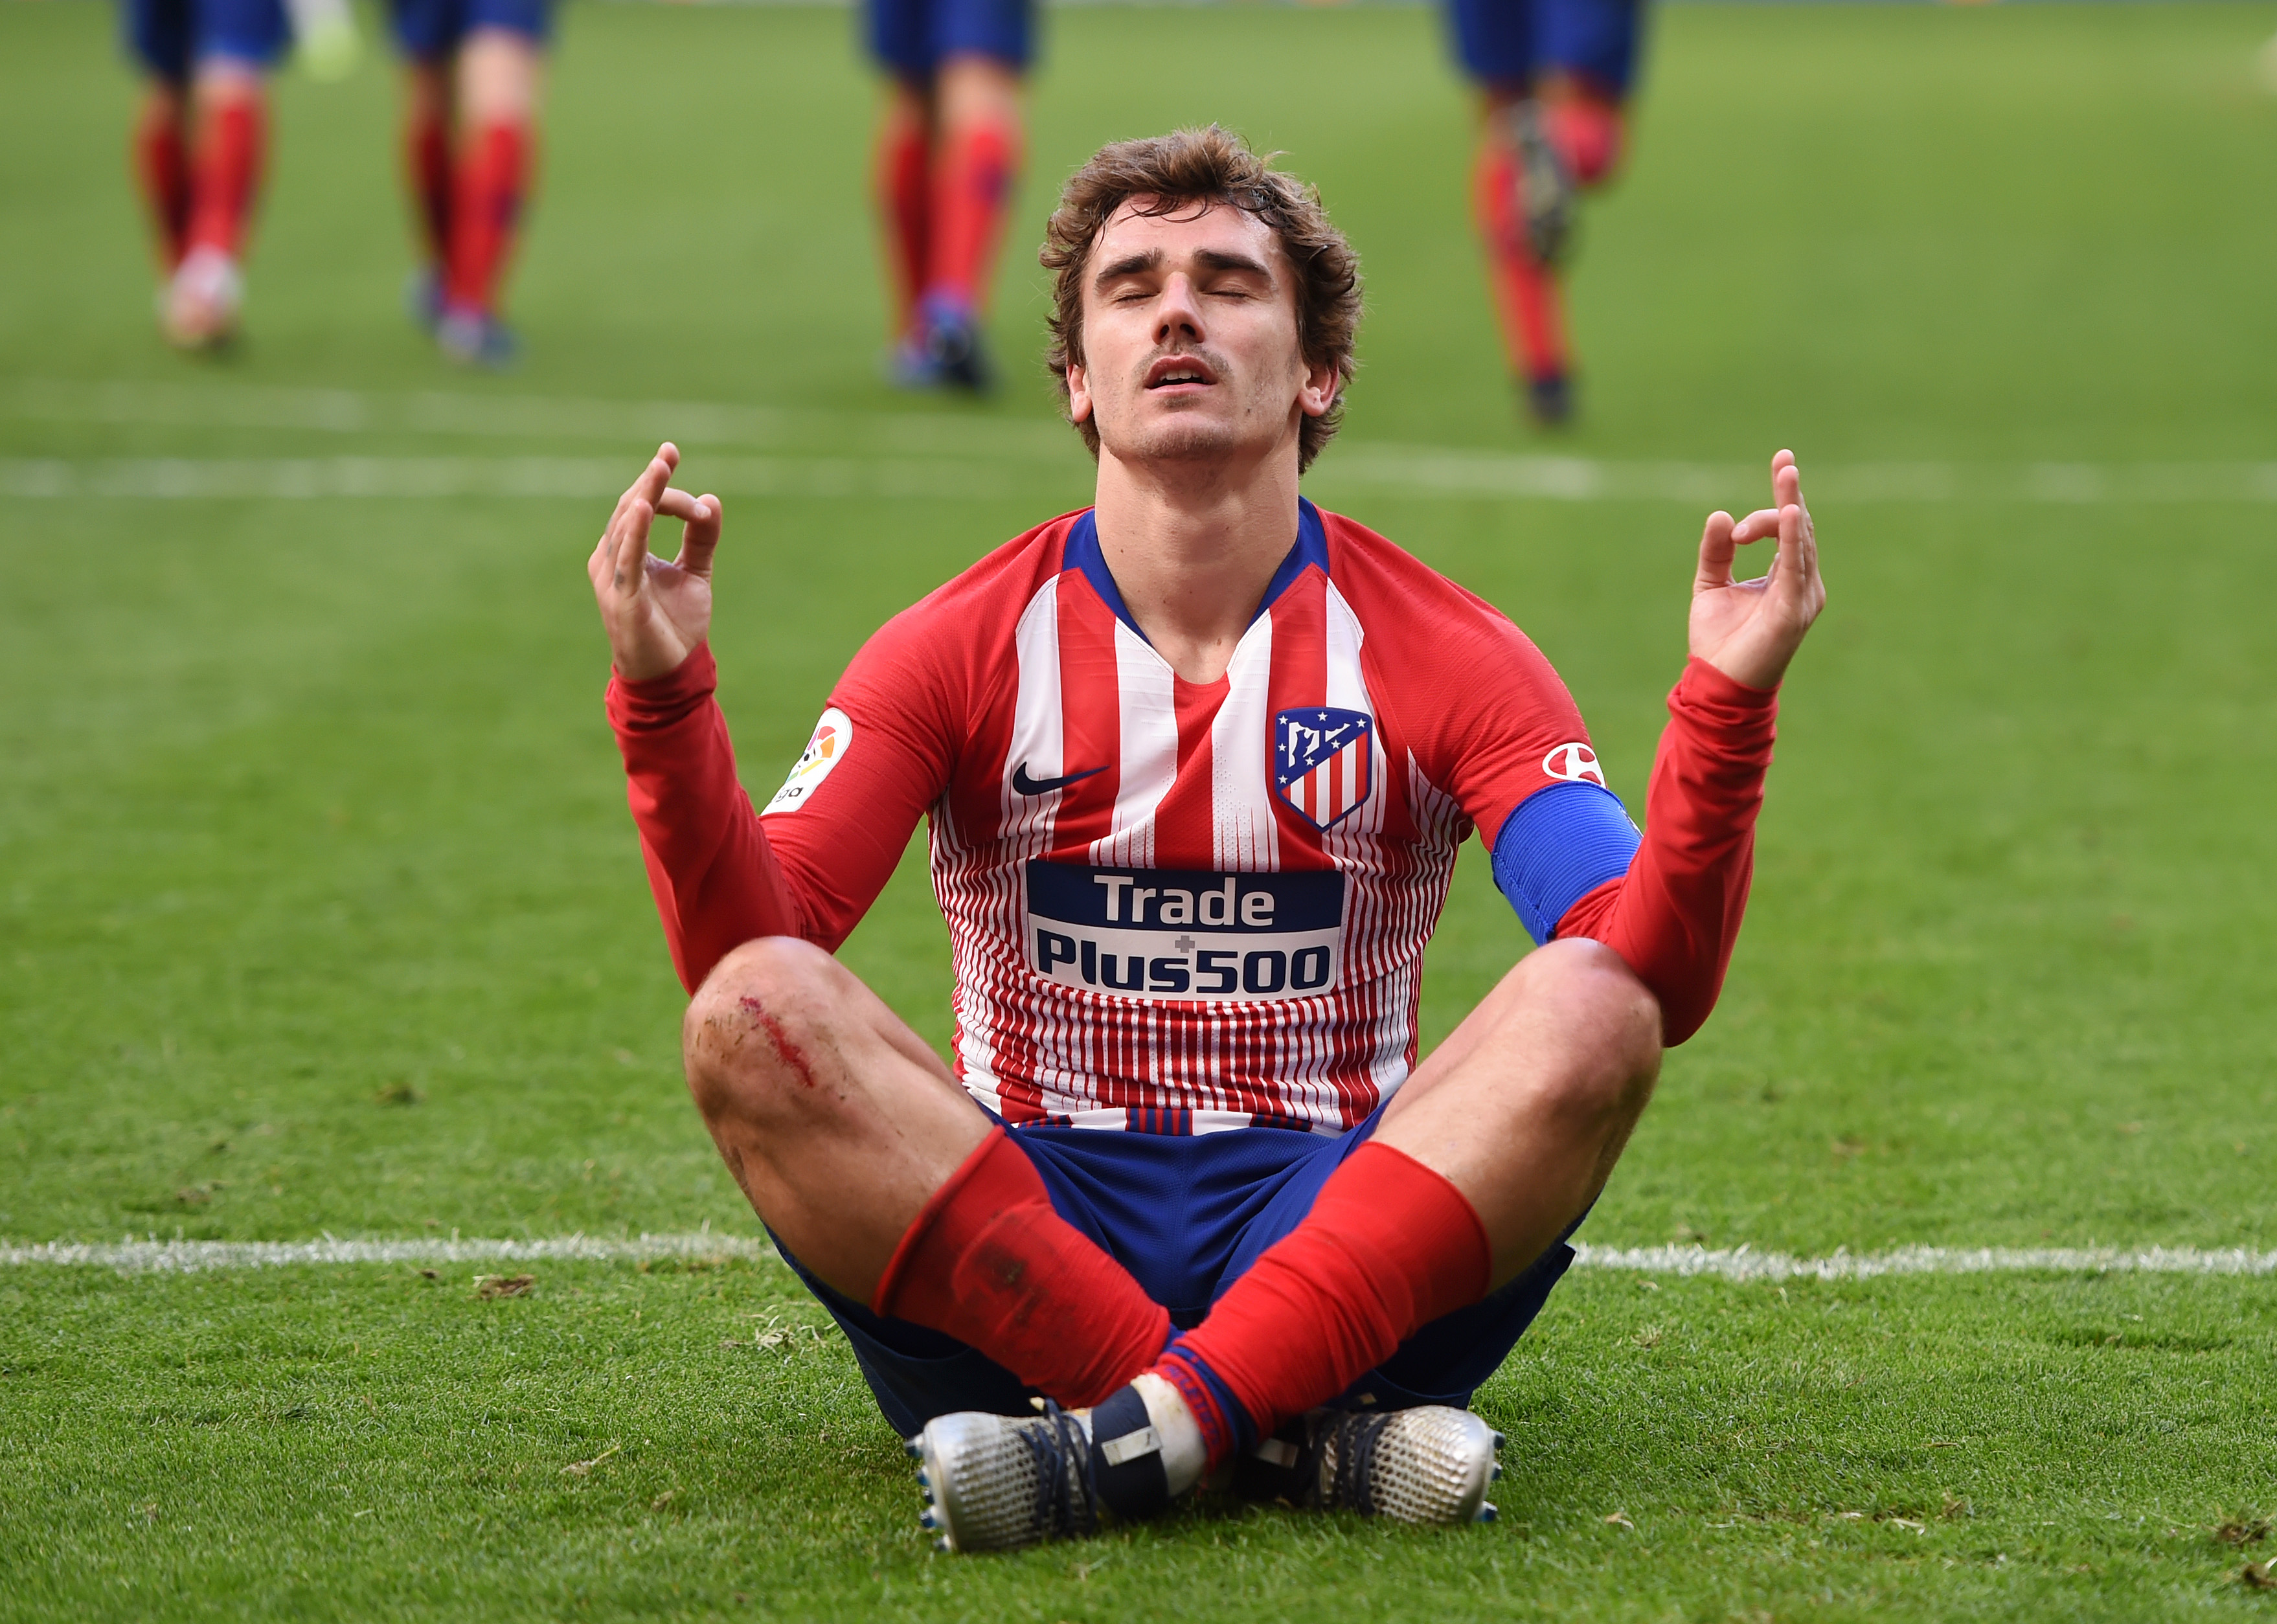 MADRID, SPAIN - DECEMBER 08: Antoine Griezmann of Atletico Madrid celebrates after scoring his team's second goal during the La Liga match between Club Atletico de Madrid and Deportivo Alaves at Wanda Metropolitano on December 8, 2018 in Madrid, Spain. (Photo by Denis Doyle/Getty Images)